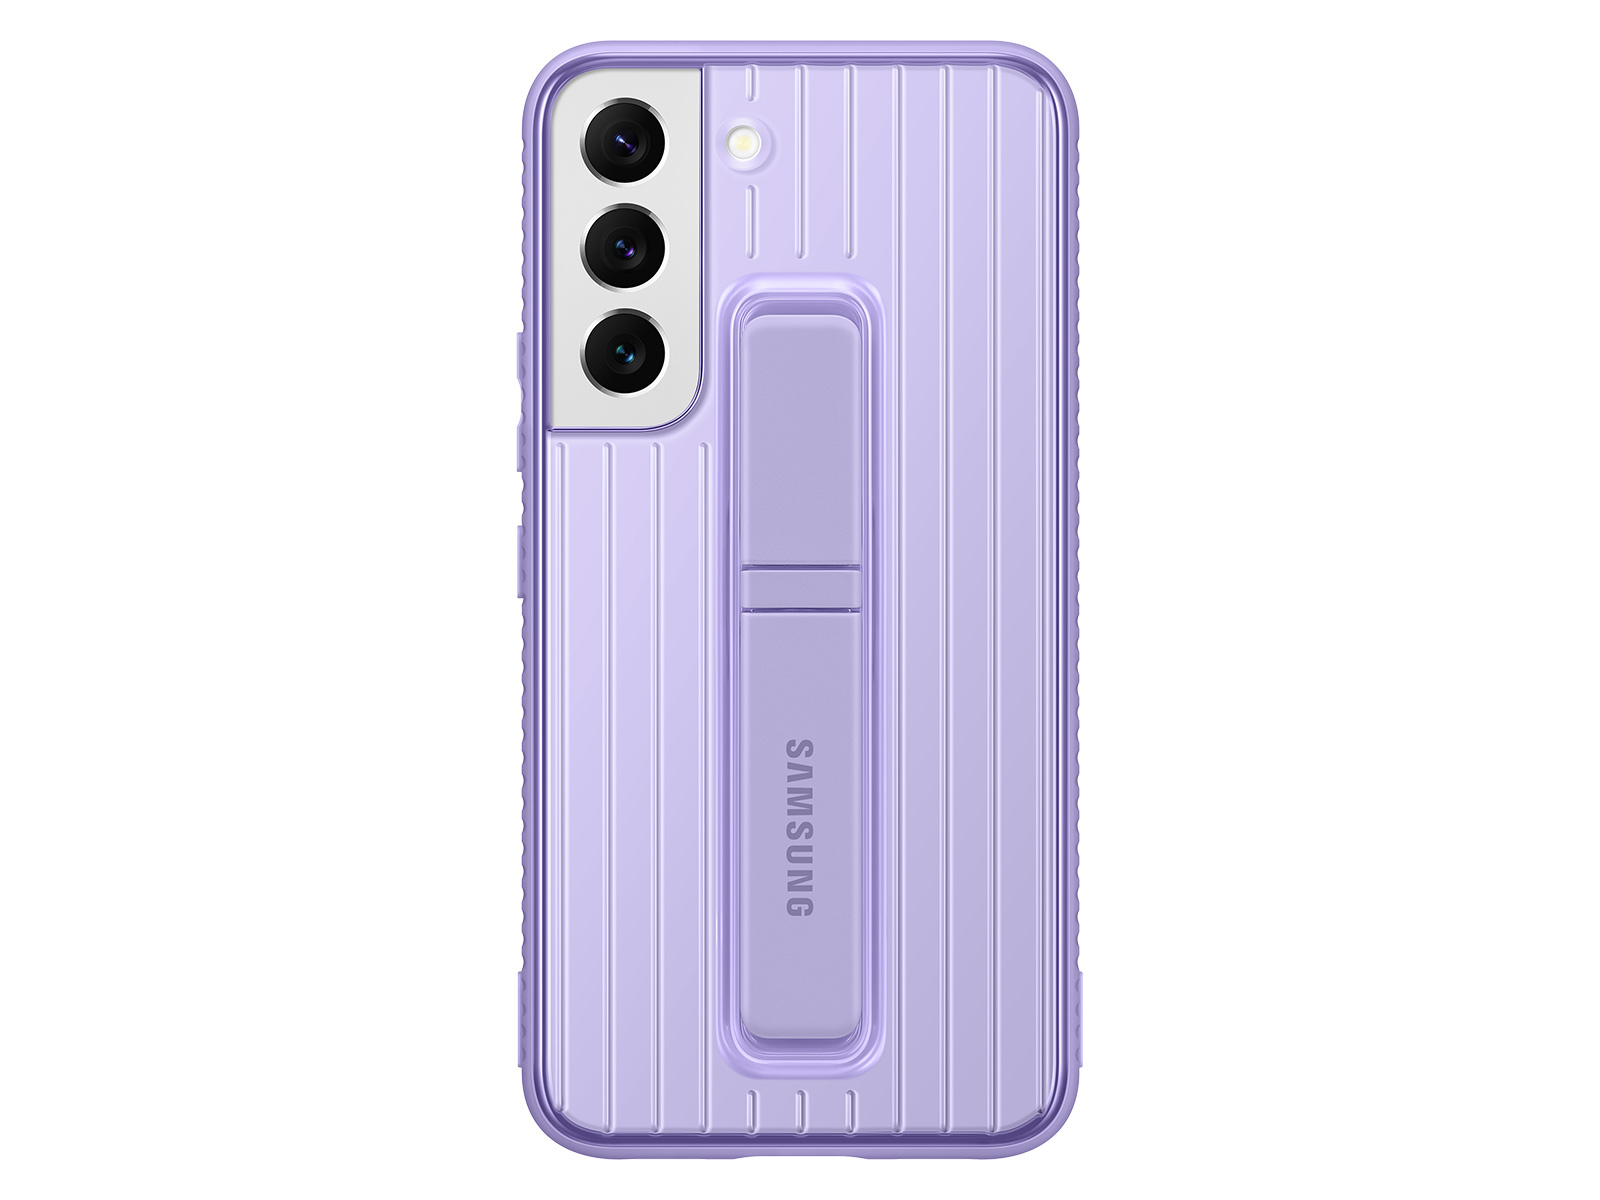 Galaxy S22 Protective Standing Cover, Fresh Lavender